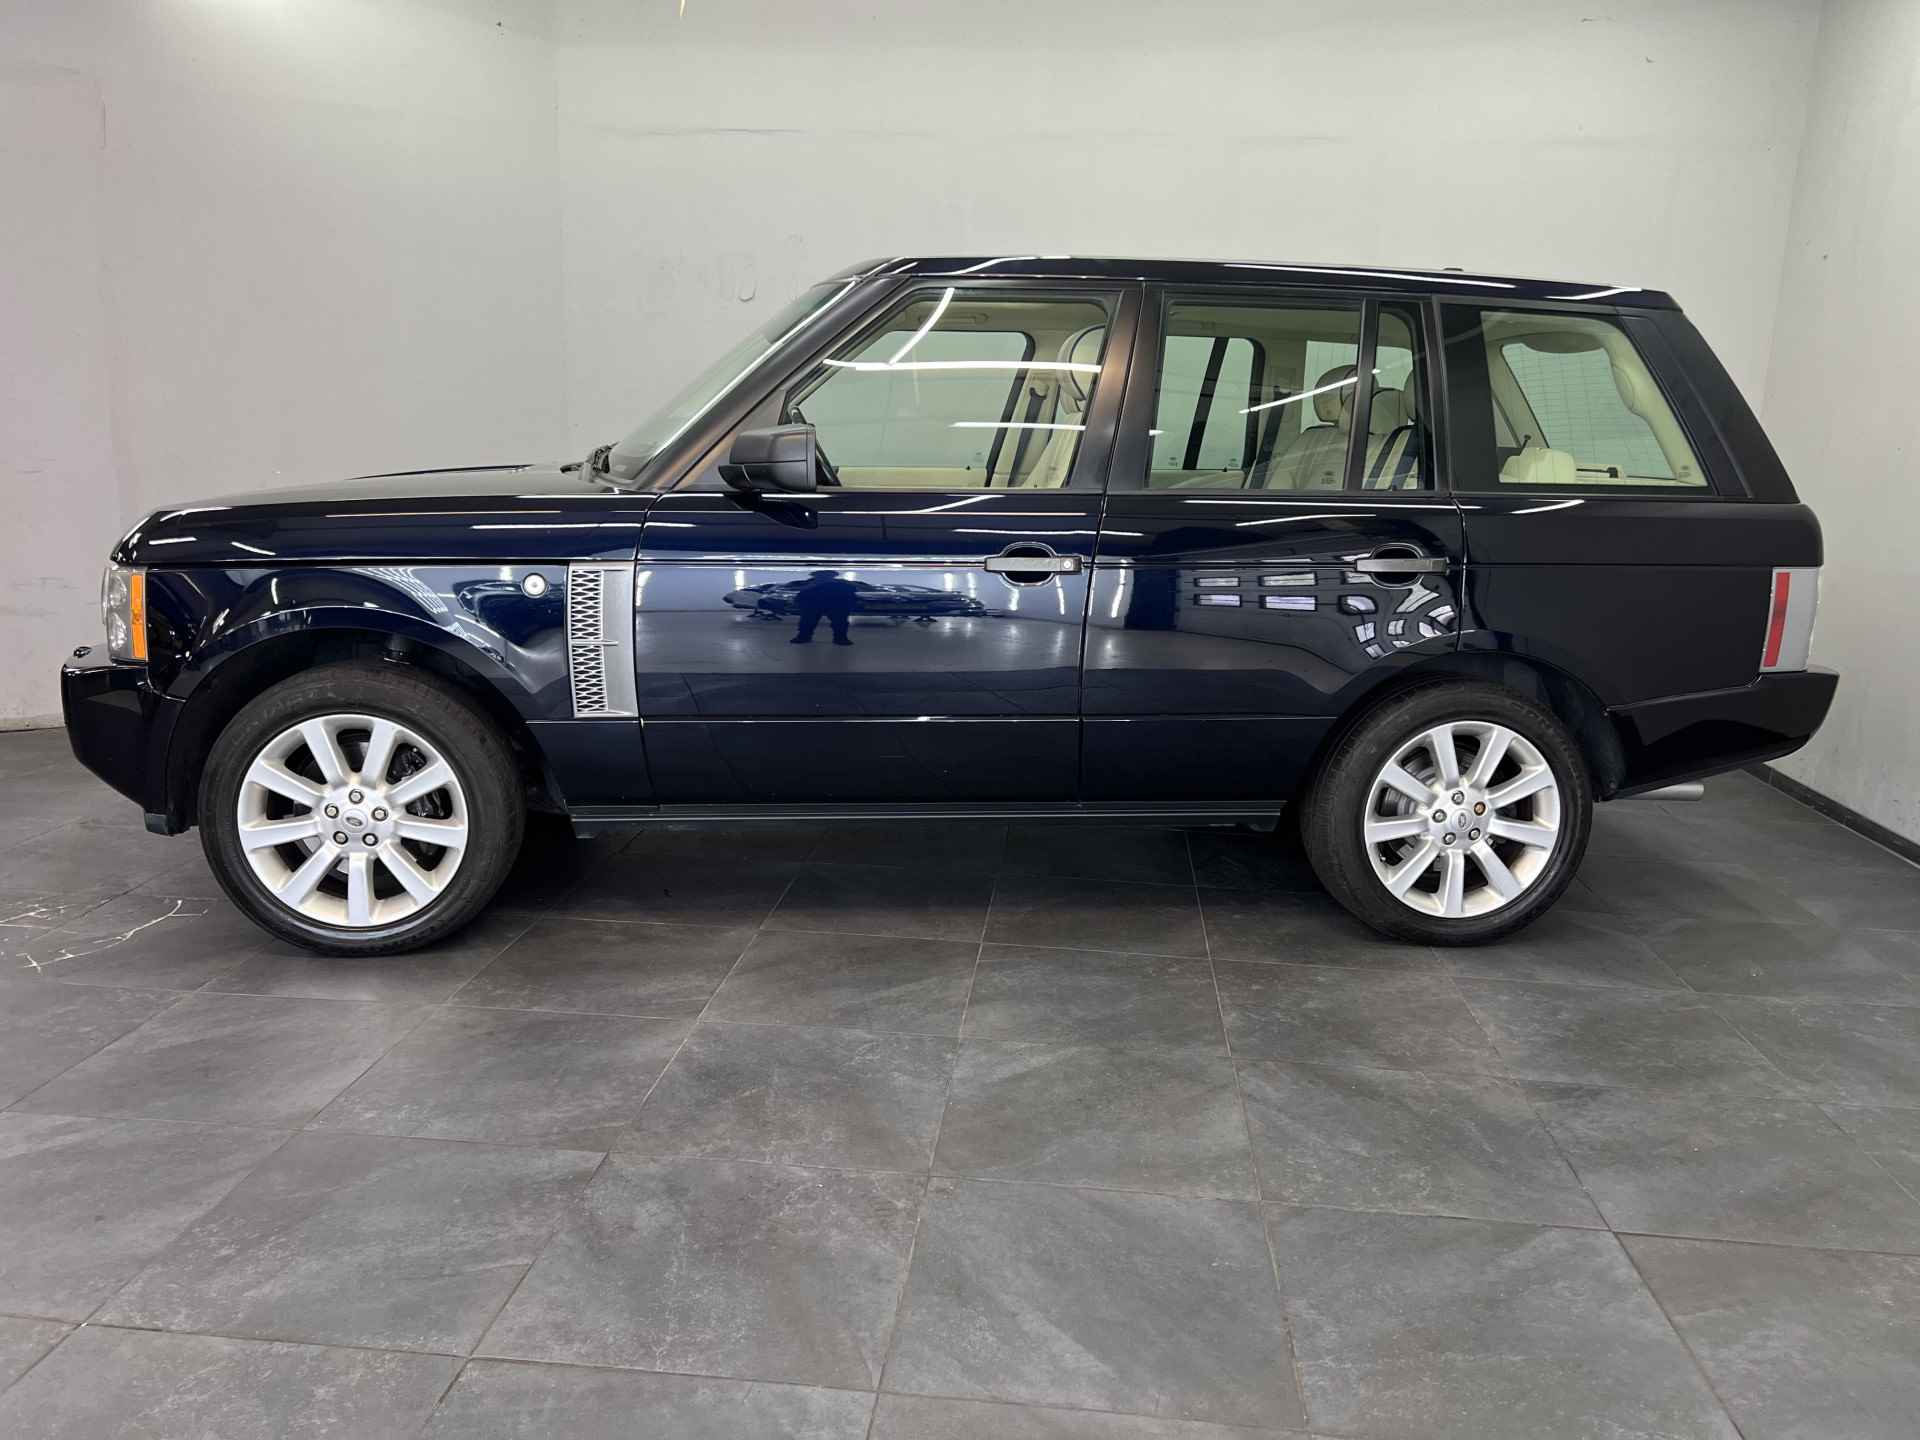 Land Rover Range Rover 4.2 V8 Supercharged ✅UNIEKE STAAT✅Airco✅Cruise controle✅Navigatie✅5 deurs✅TREKHAAK - 9/52